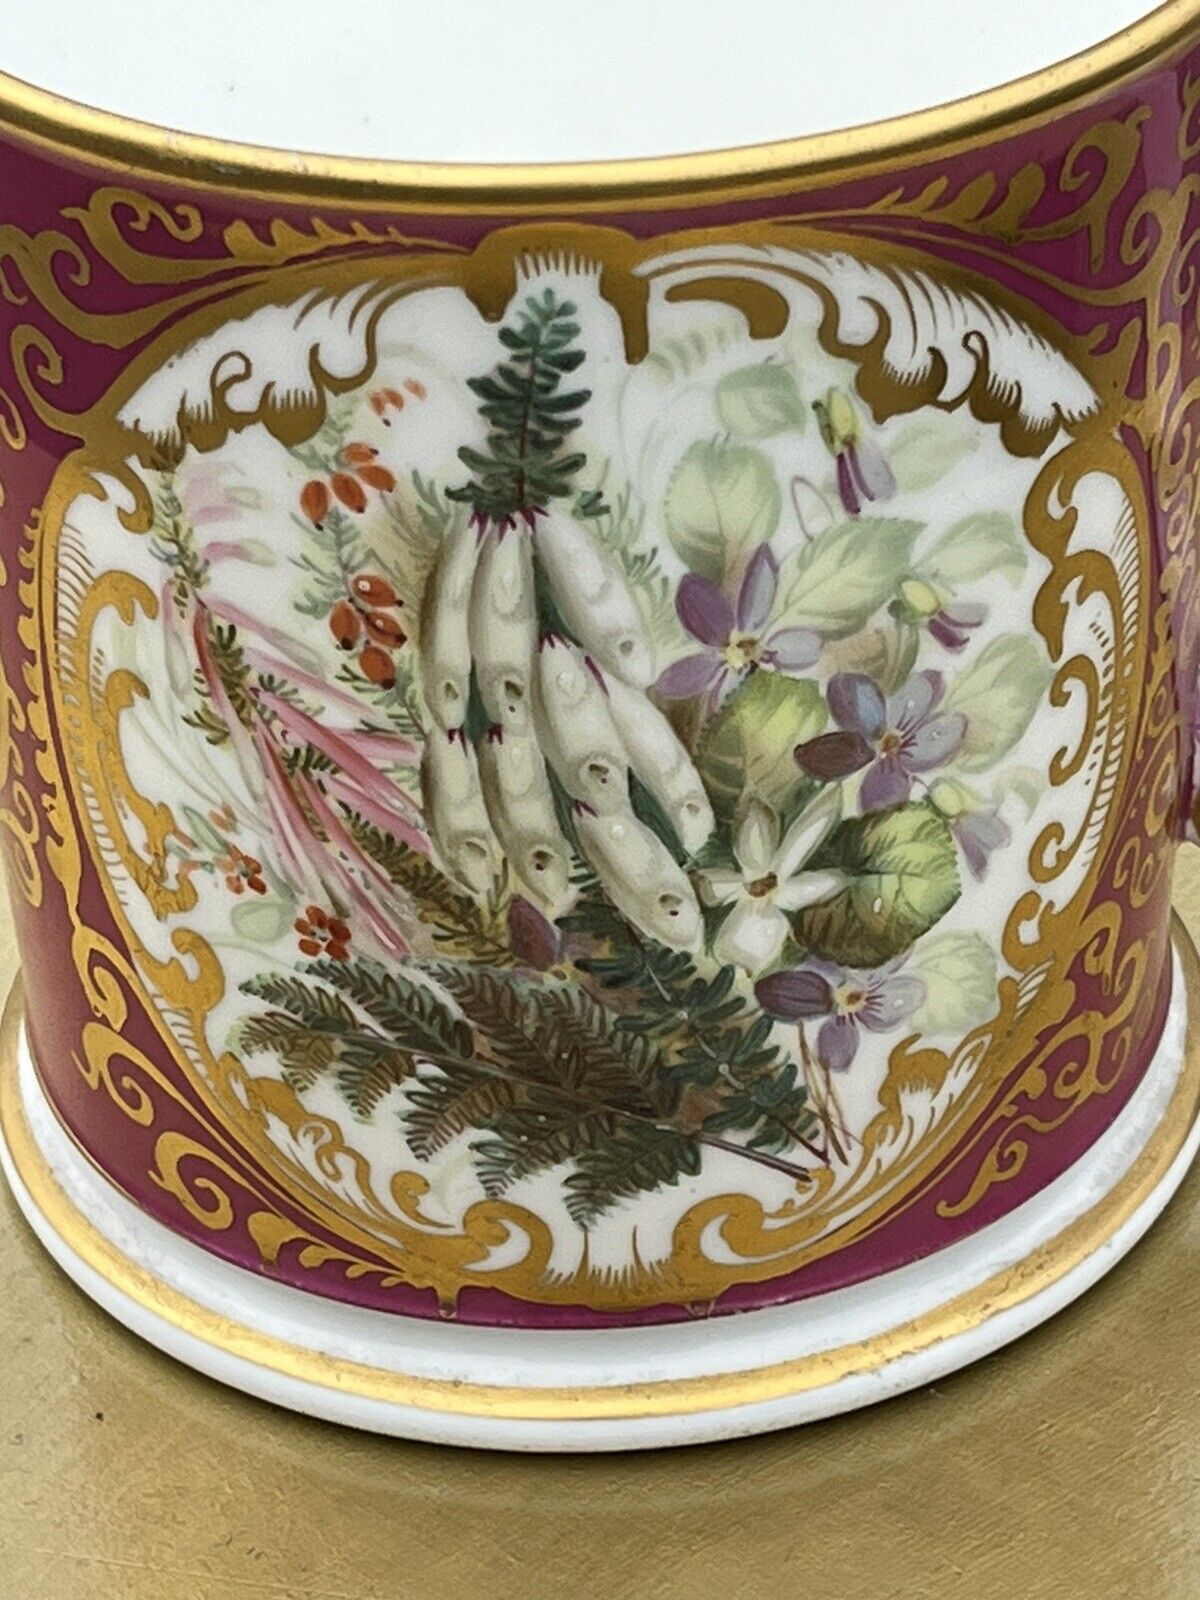 Victorian Porcelain Hand Decorated Cup. Large In Size.